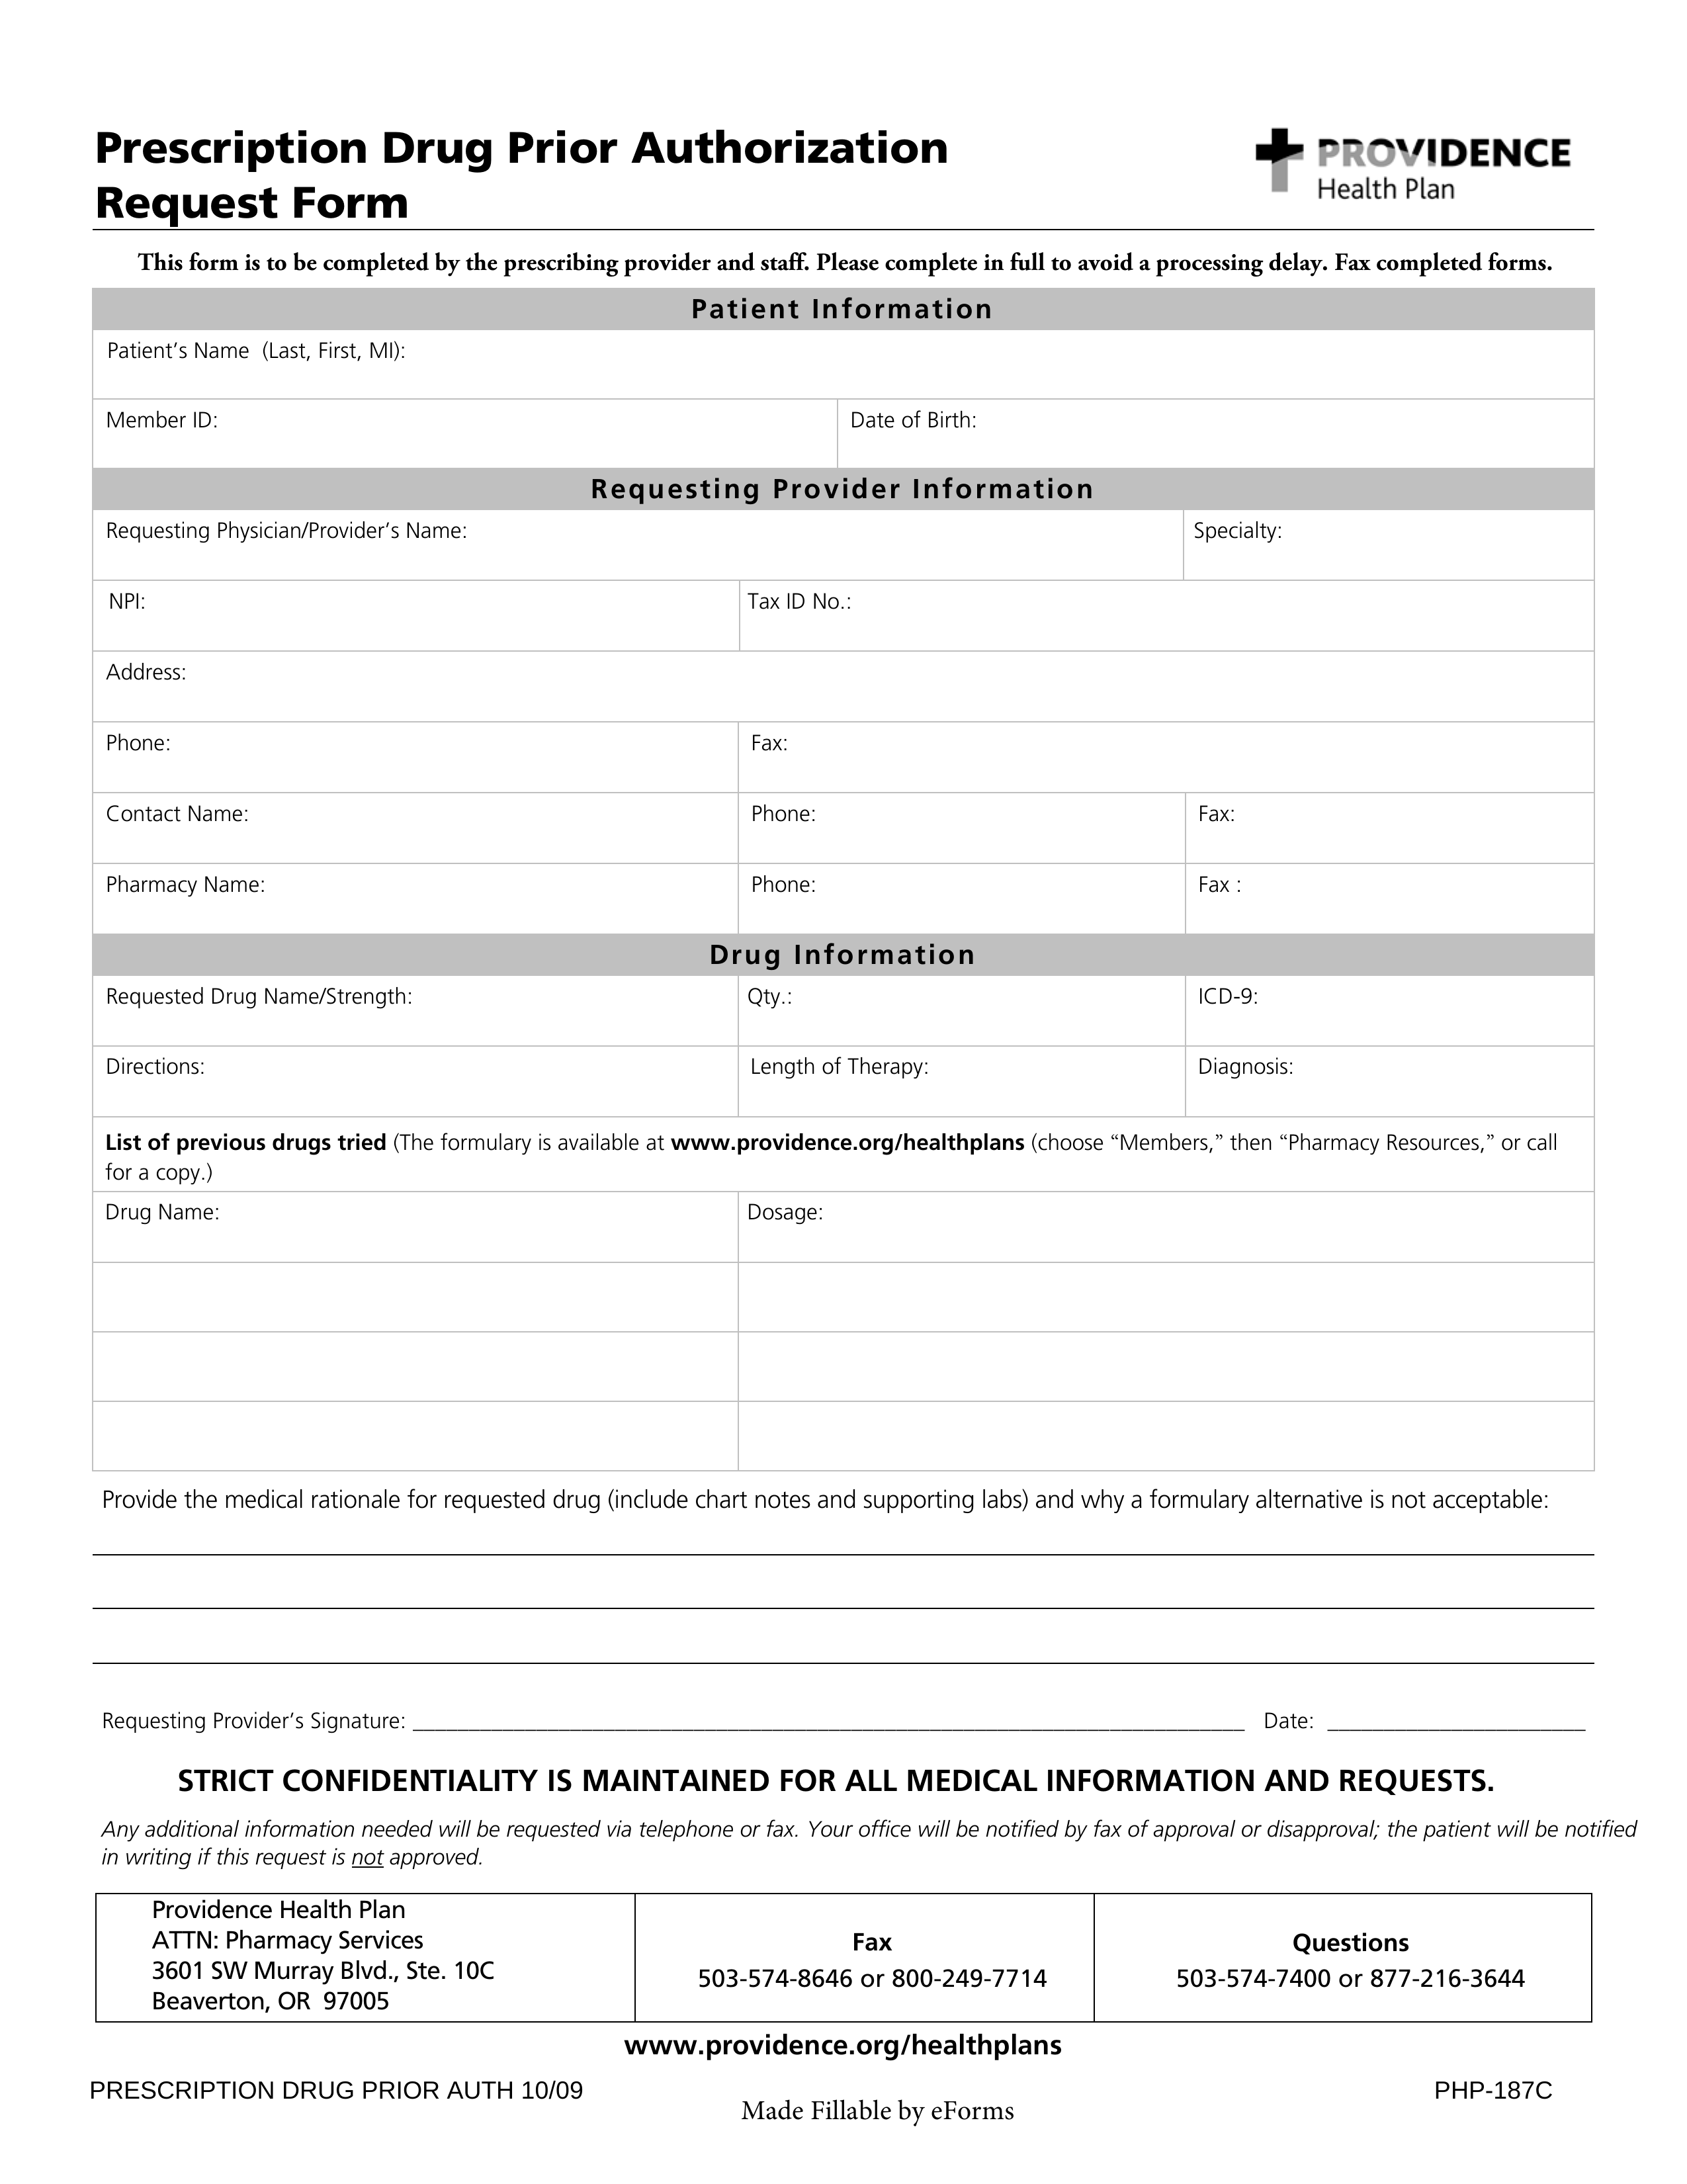 Providence Prior (Rx) Authorization Form